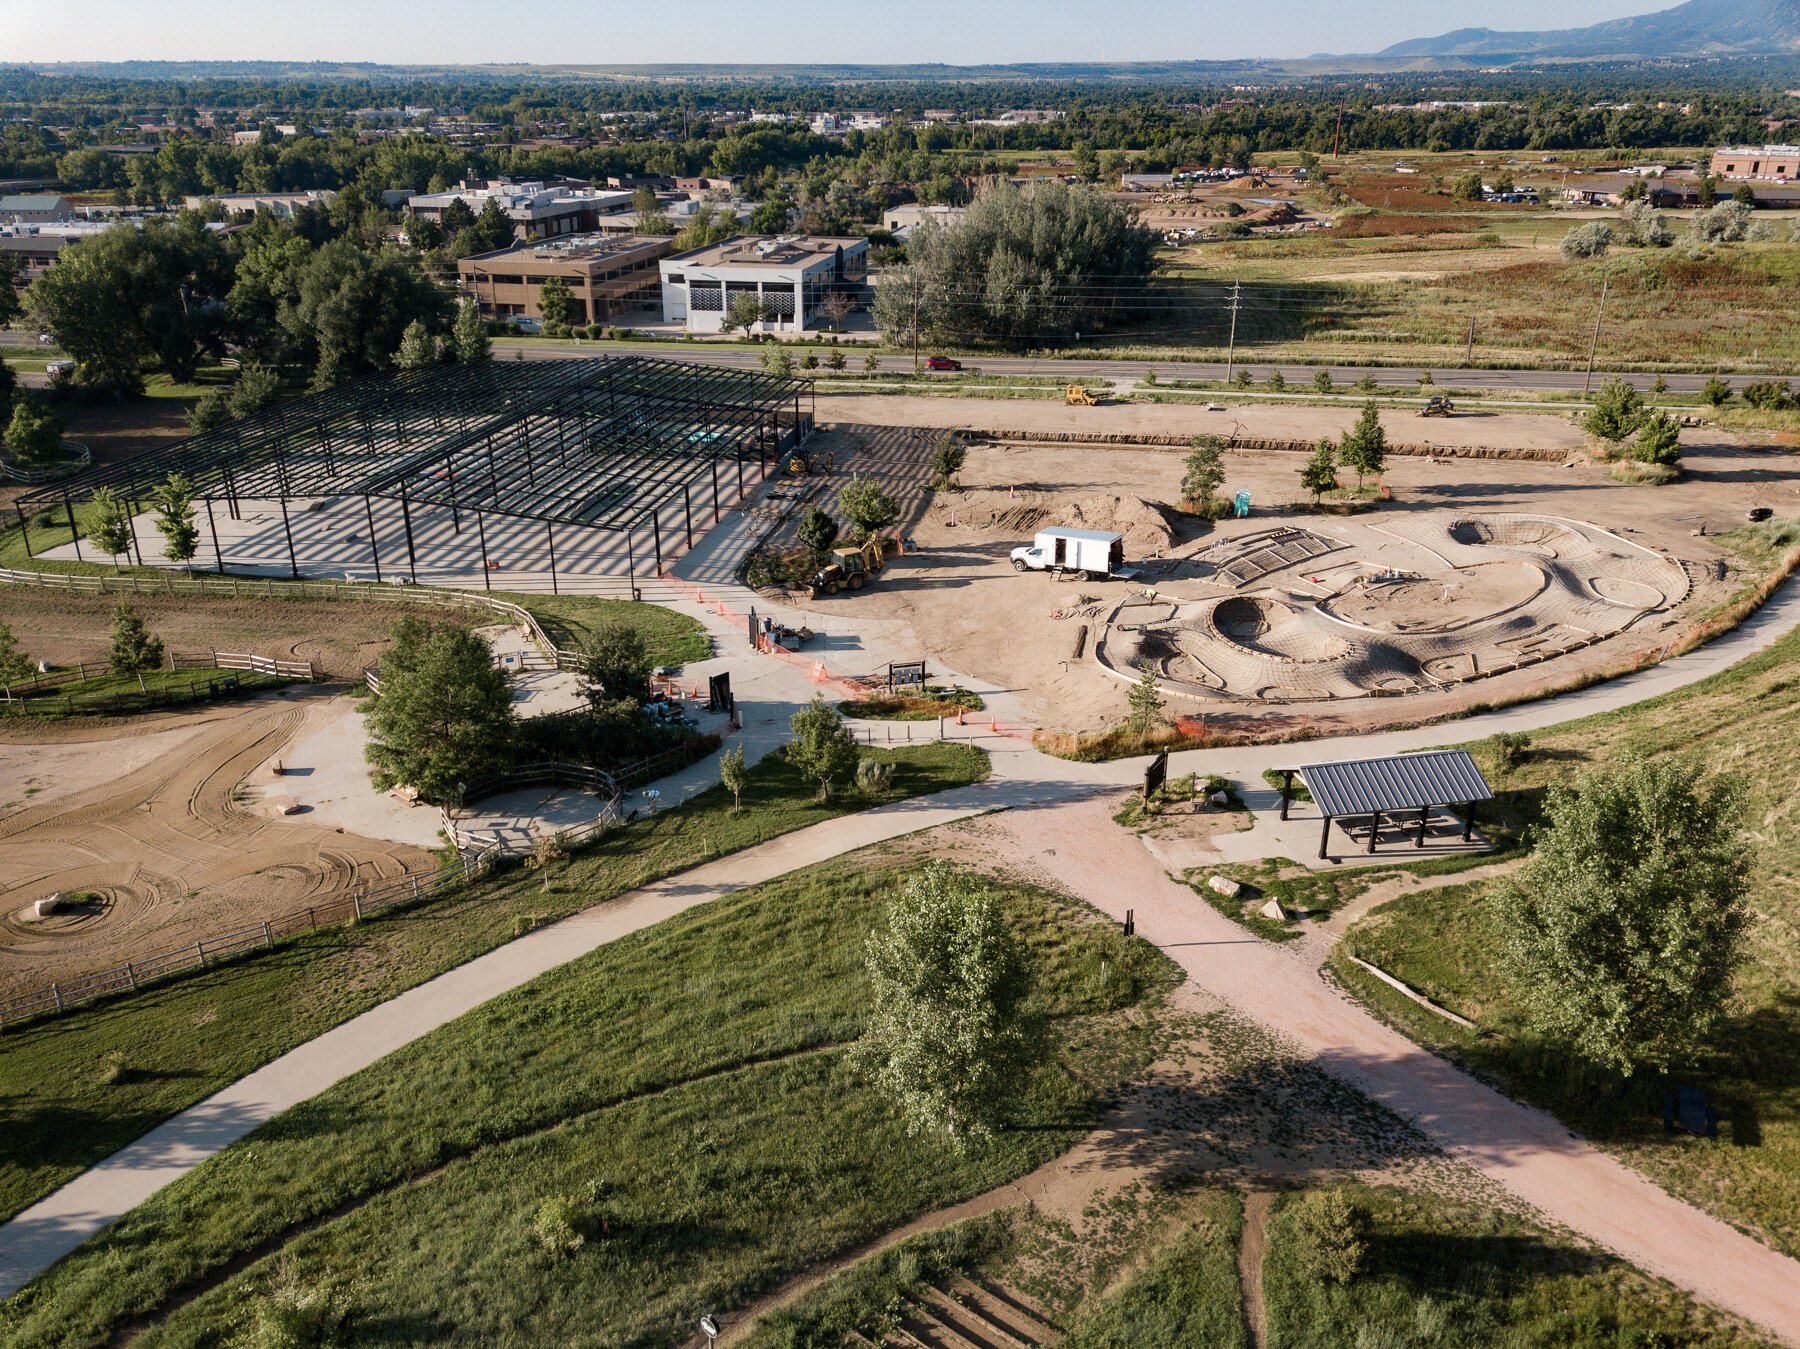 Boulder, Colorado got seriously hooked up this summer with new skate terrain 💪🏽 Here is the 11,000 Sq. Ft. Valmont Skatepark